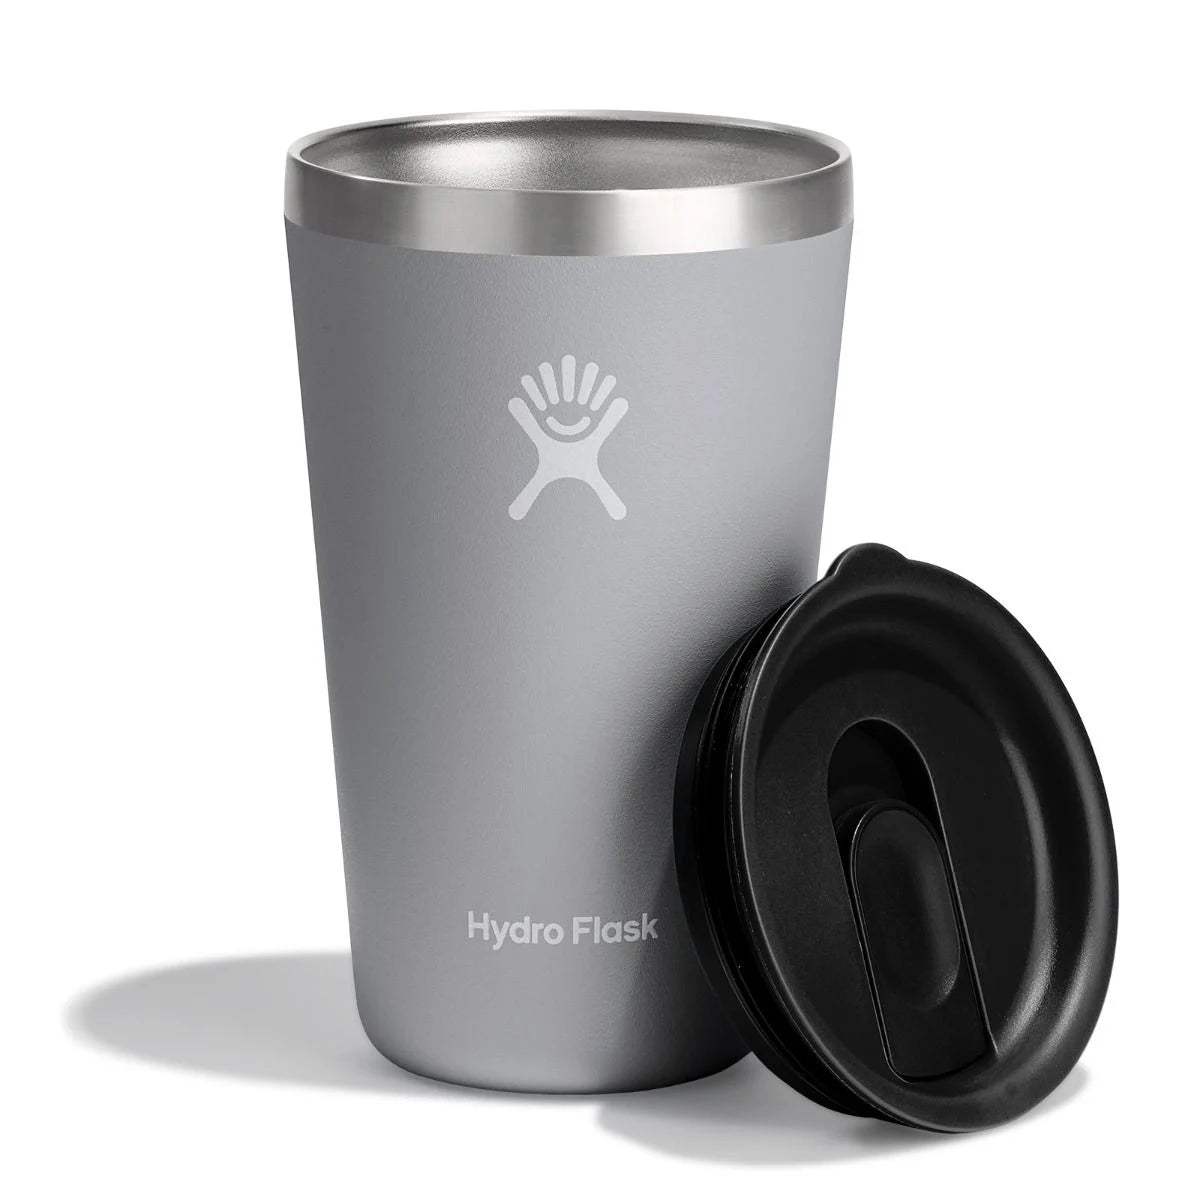 Hydro Flask 16 oz Tumbler - The Luxury Promotional Gifts Company Limited